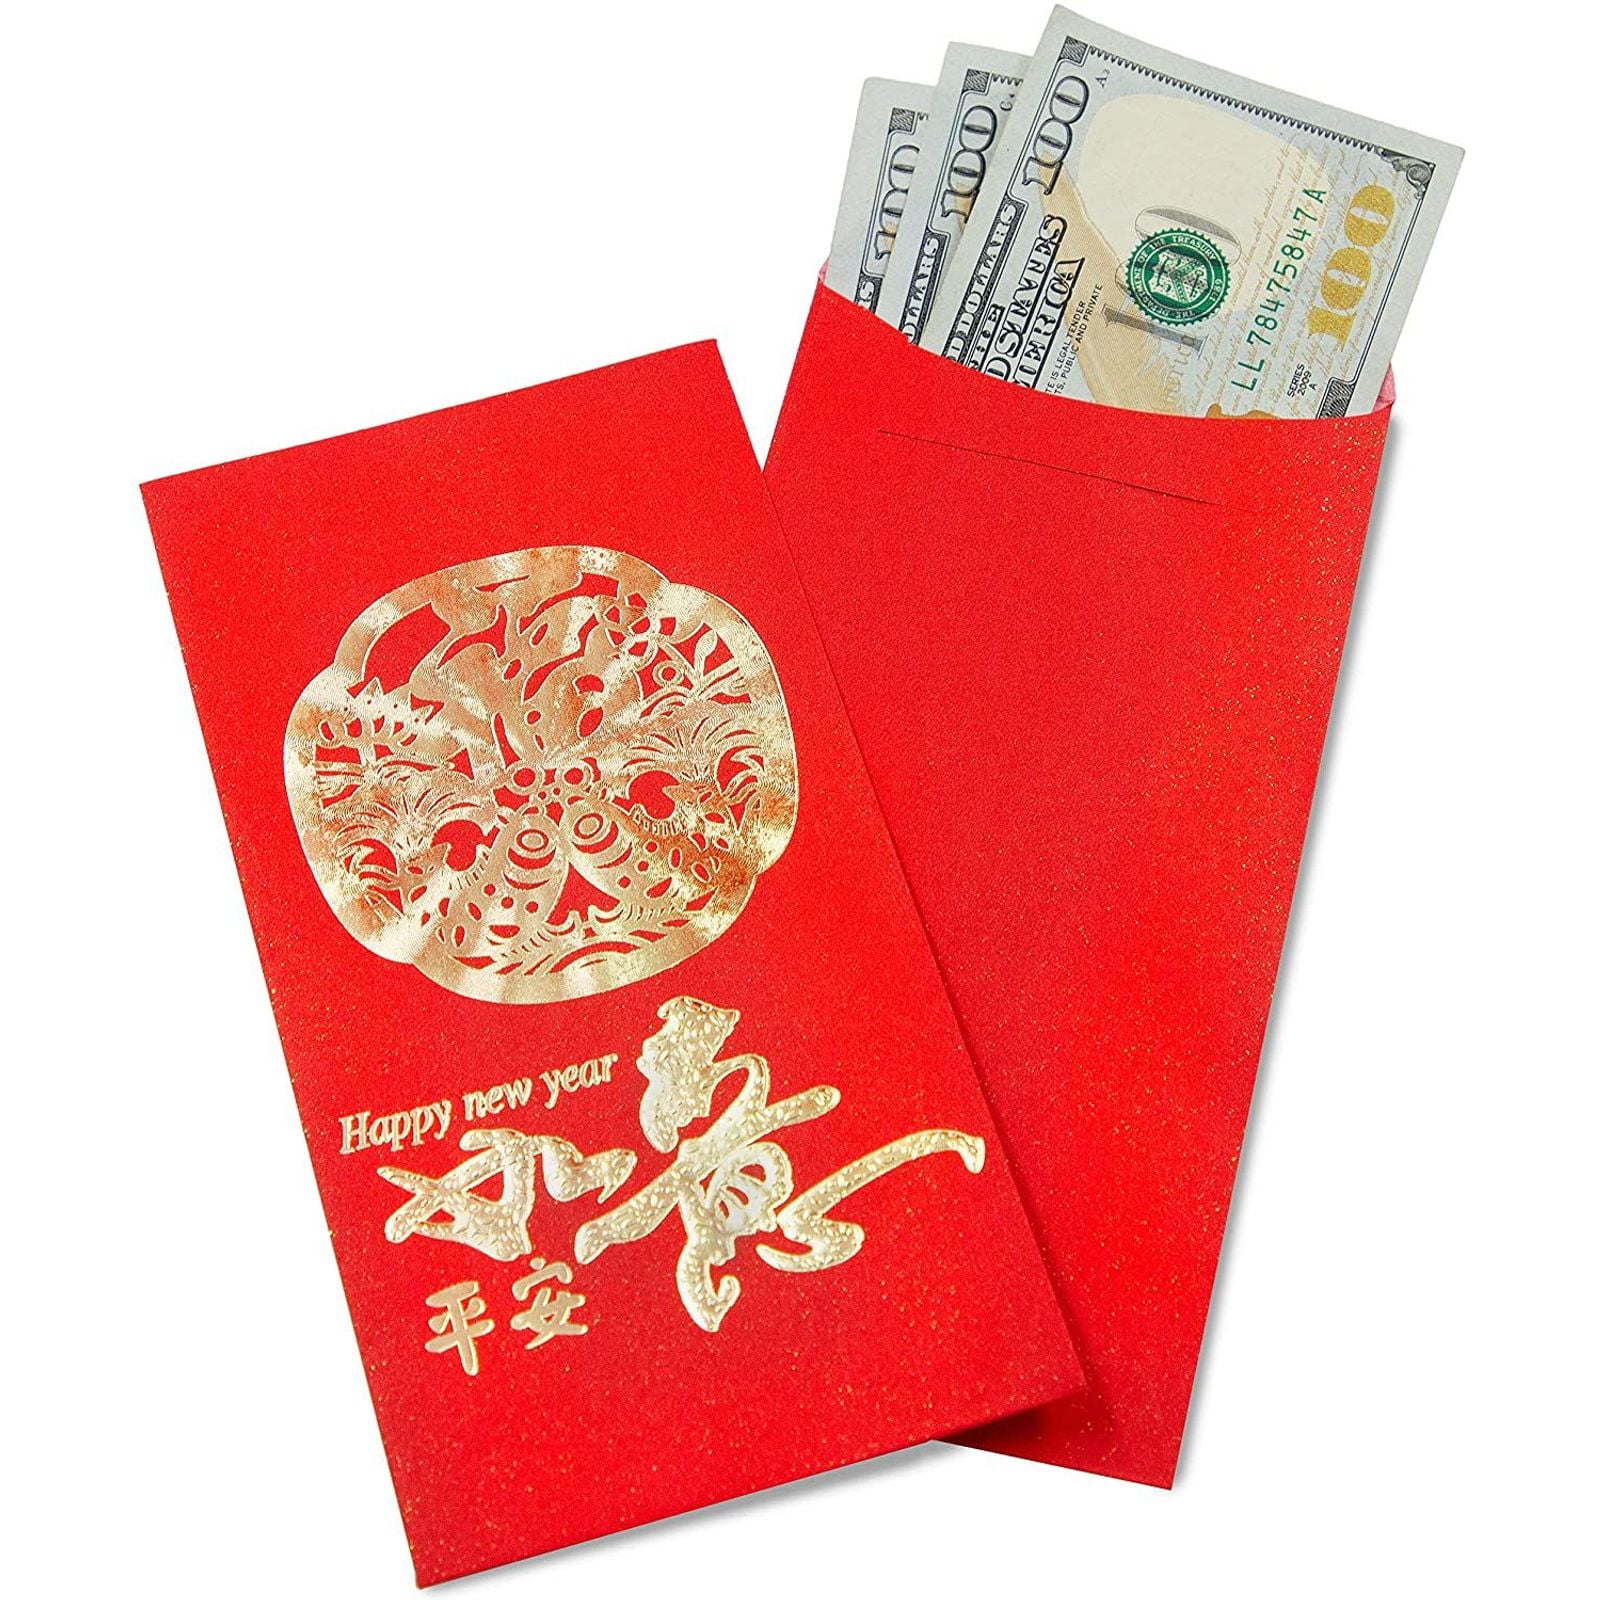 40xHappy New Year E7nvelope traditional Chinese Lunar New Year Red Lucky pocket 